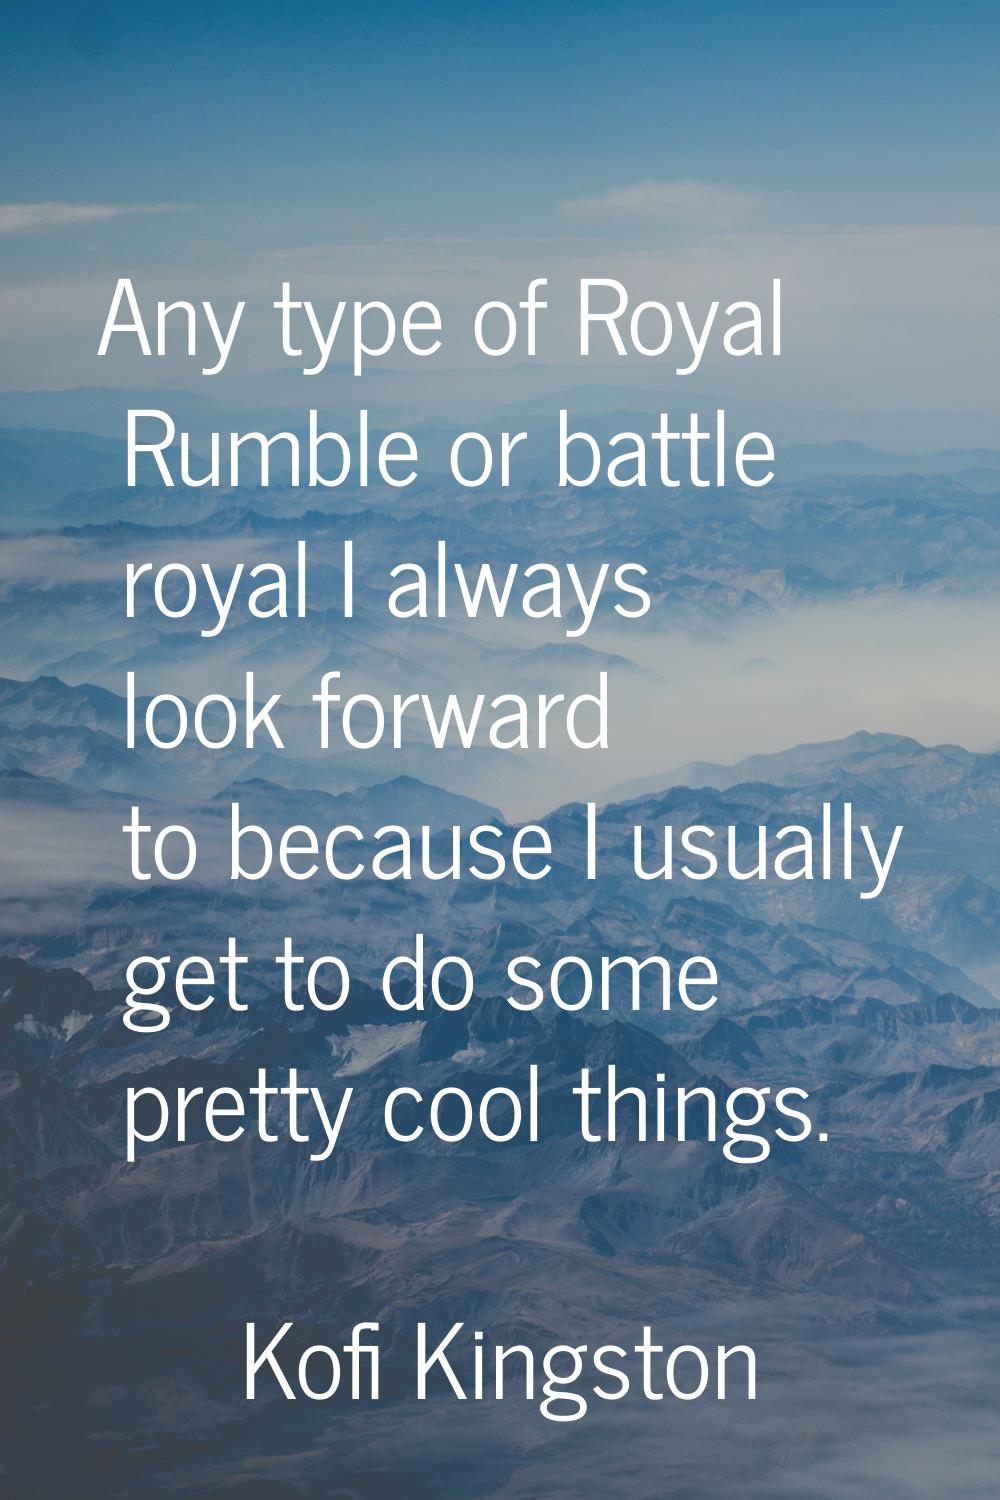 Any type of Royal Rumble or battle royal I always look forward to because I usually get to do some 